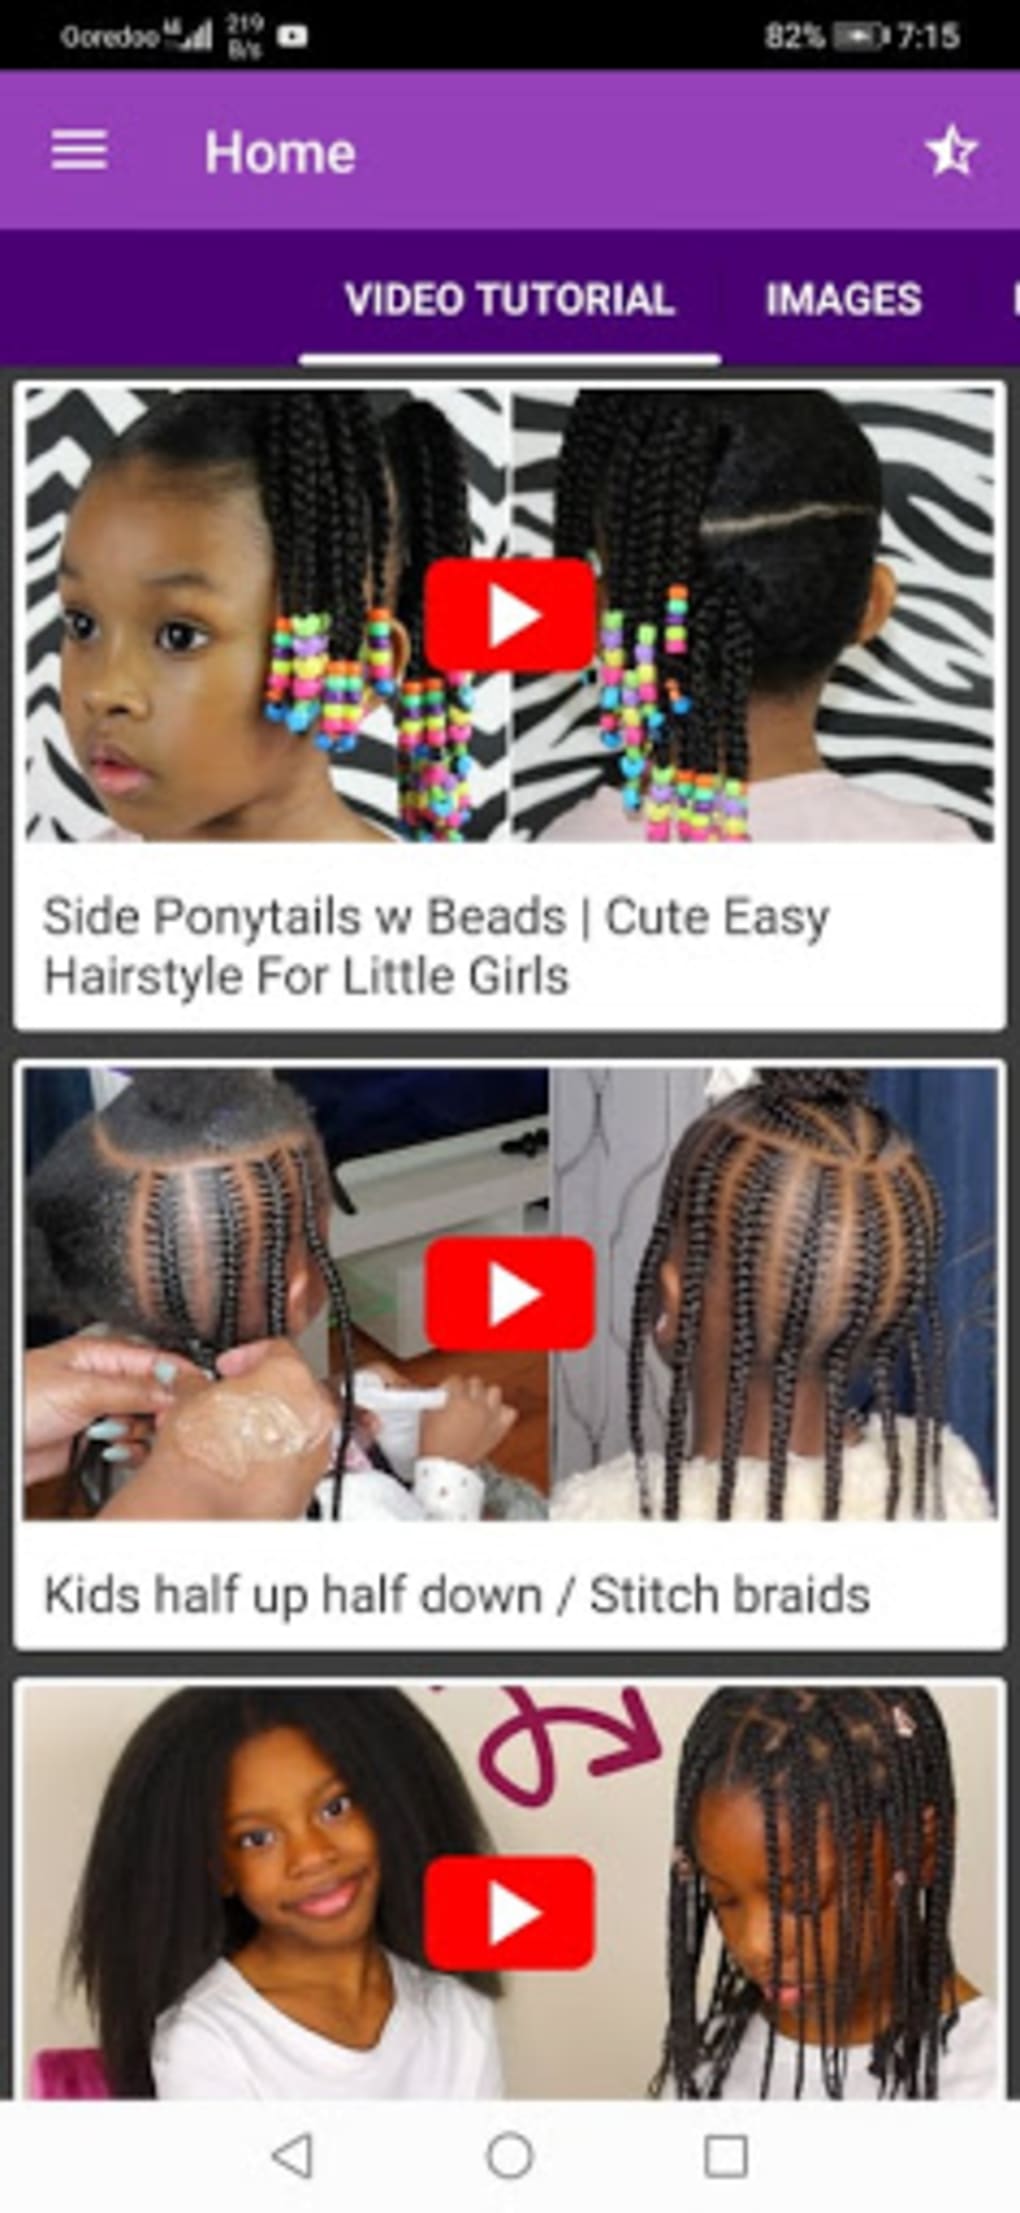 How to Get Your Perfect Haircut with AI Hairstyle Apps - YouTube